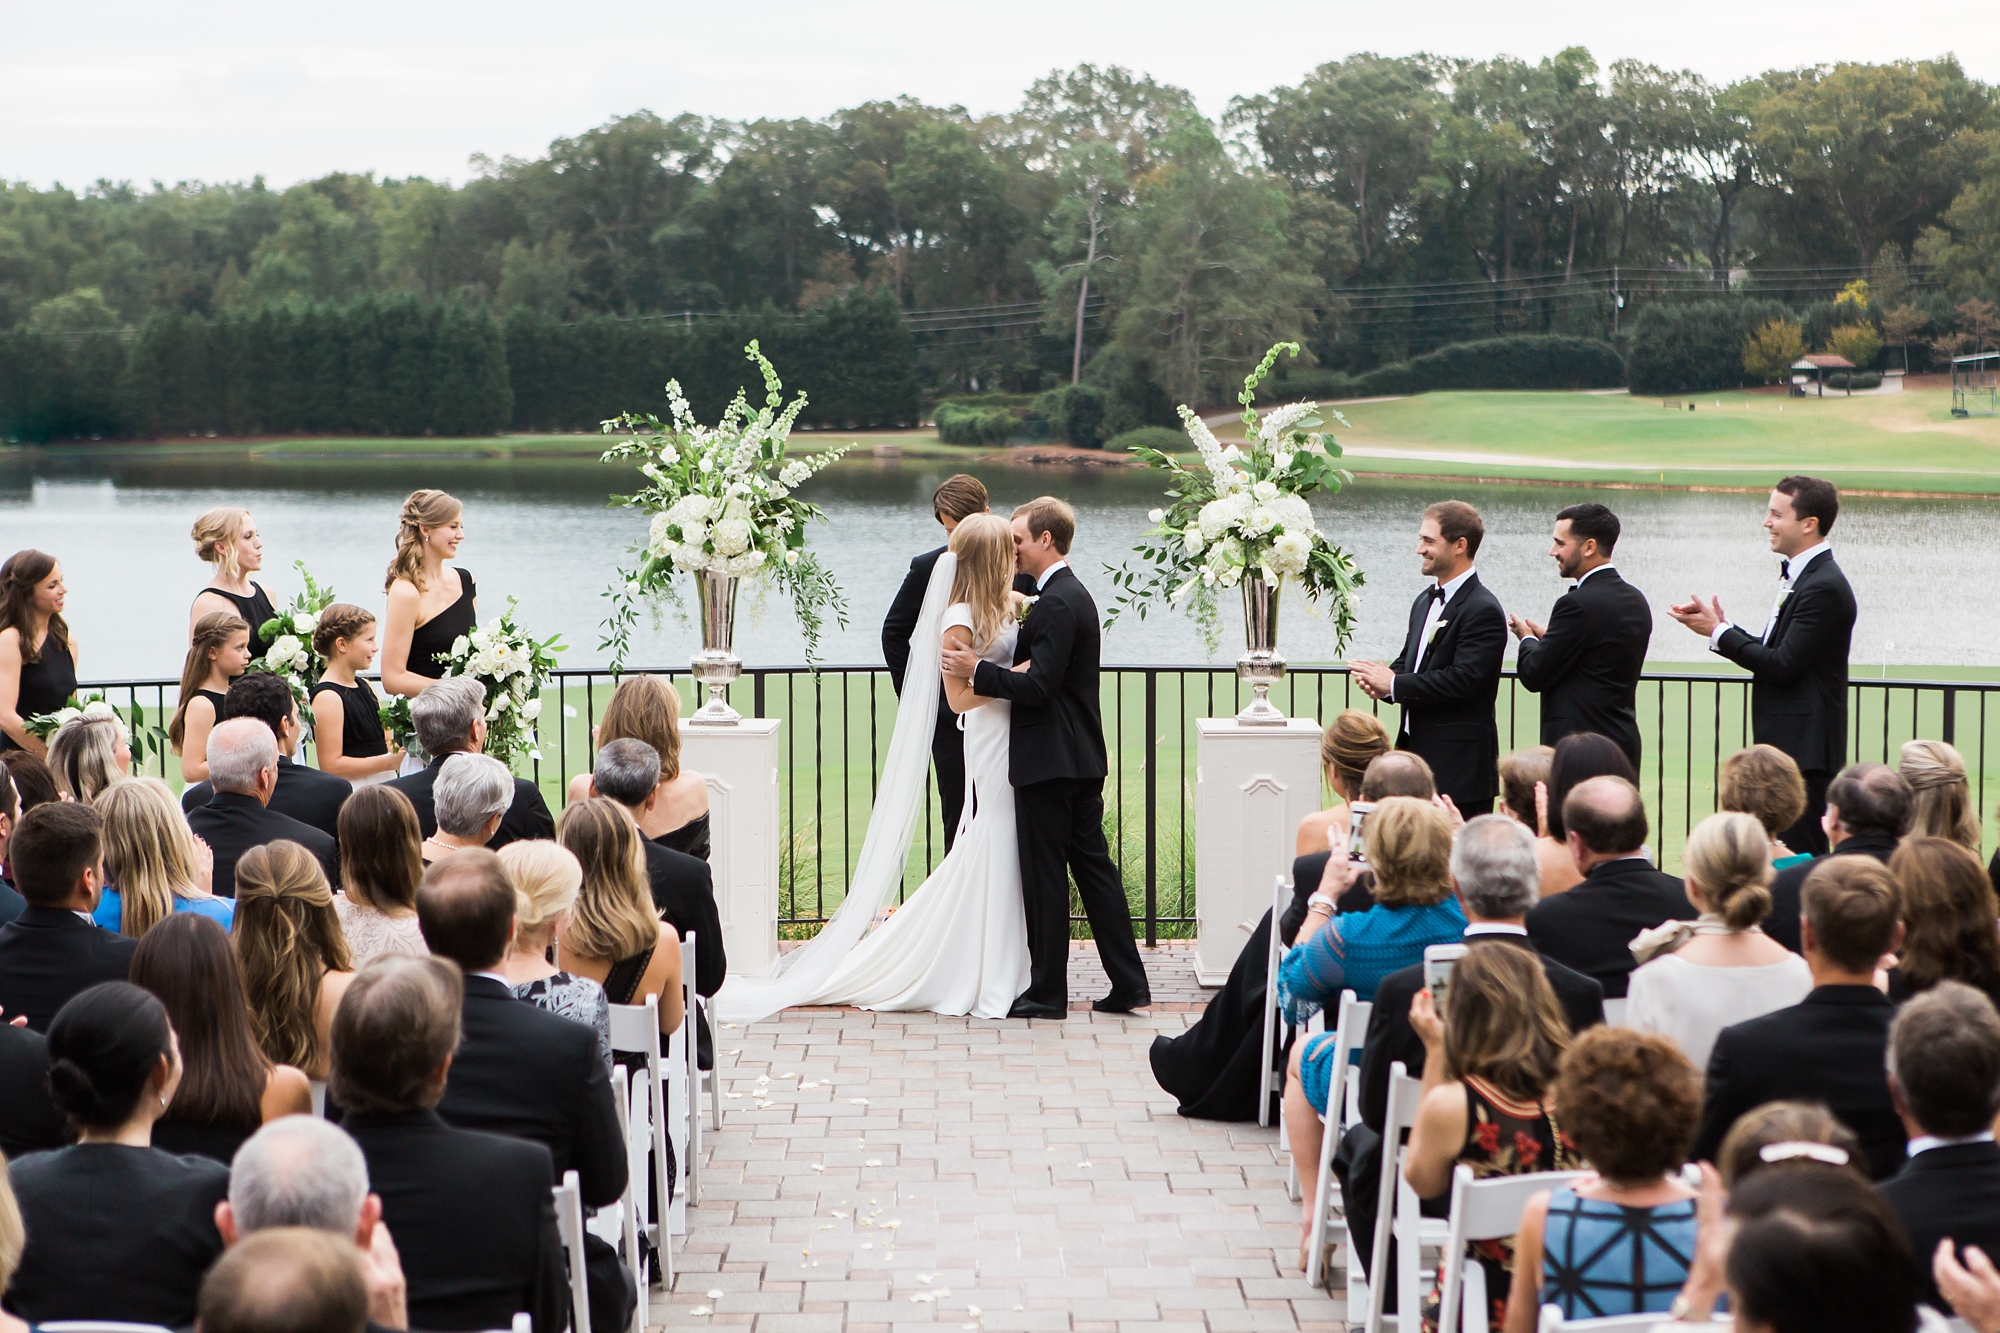 Black tie wedding ceremony at East Lake Golf Club by Atlanta's top wedding photographer Leigh Wolfe Photography